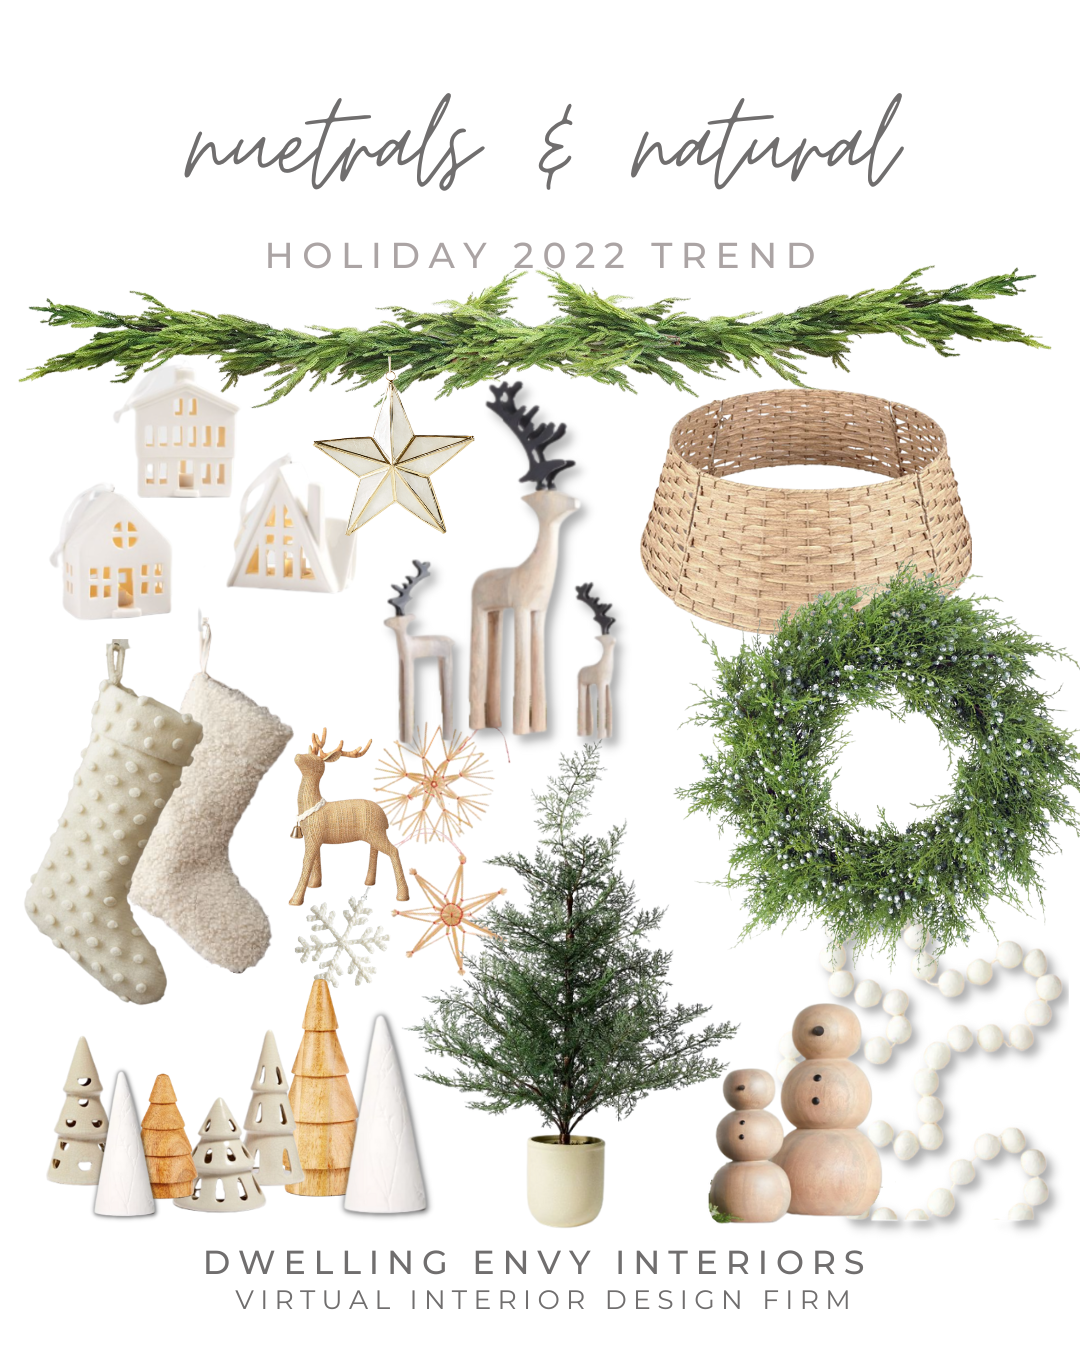 image of Dwelling Envy's Recommendation for Natural and Neutral Holiday Decor including tree collars, knit stockings, Wooden snowmen, mantle decor